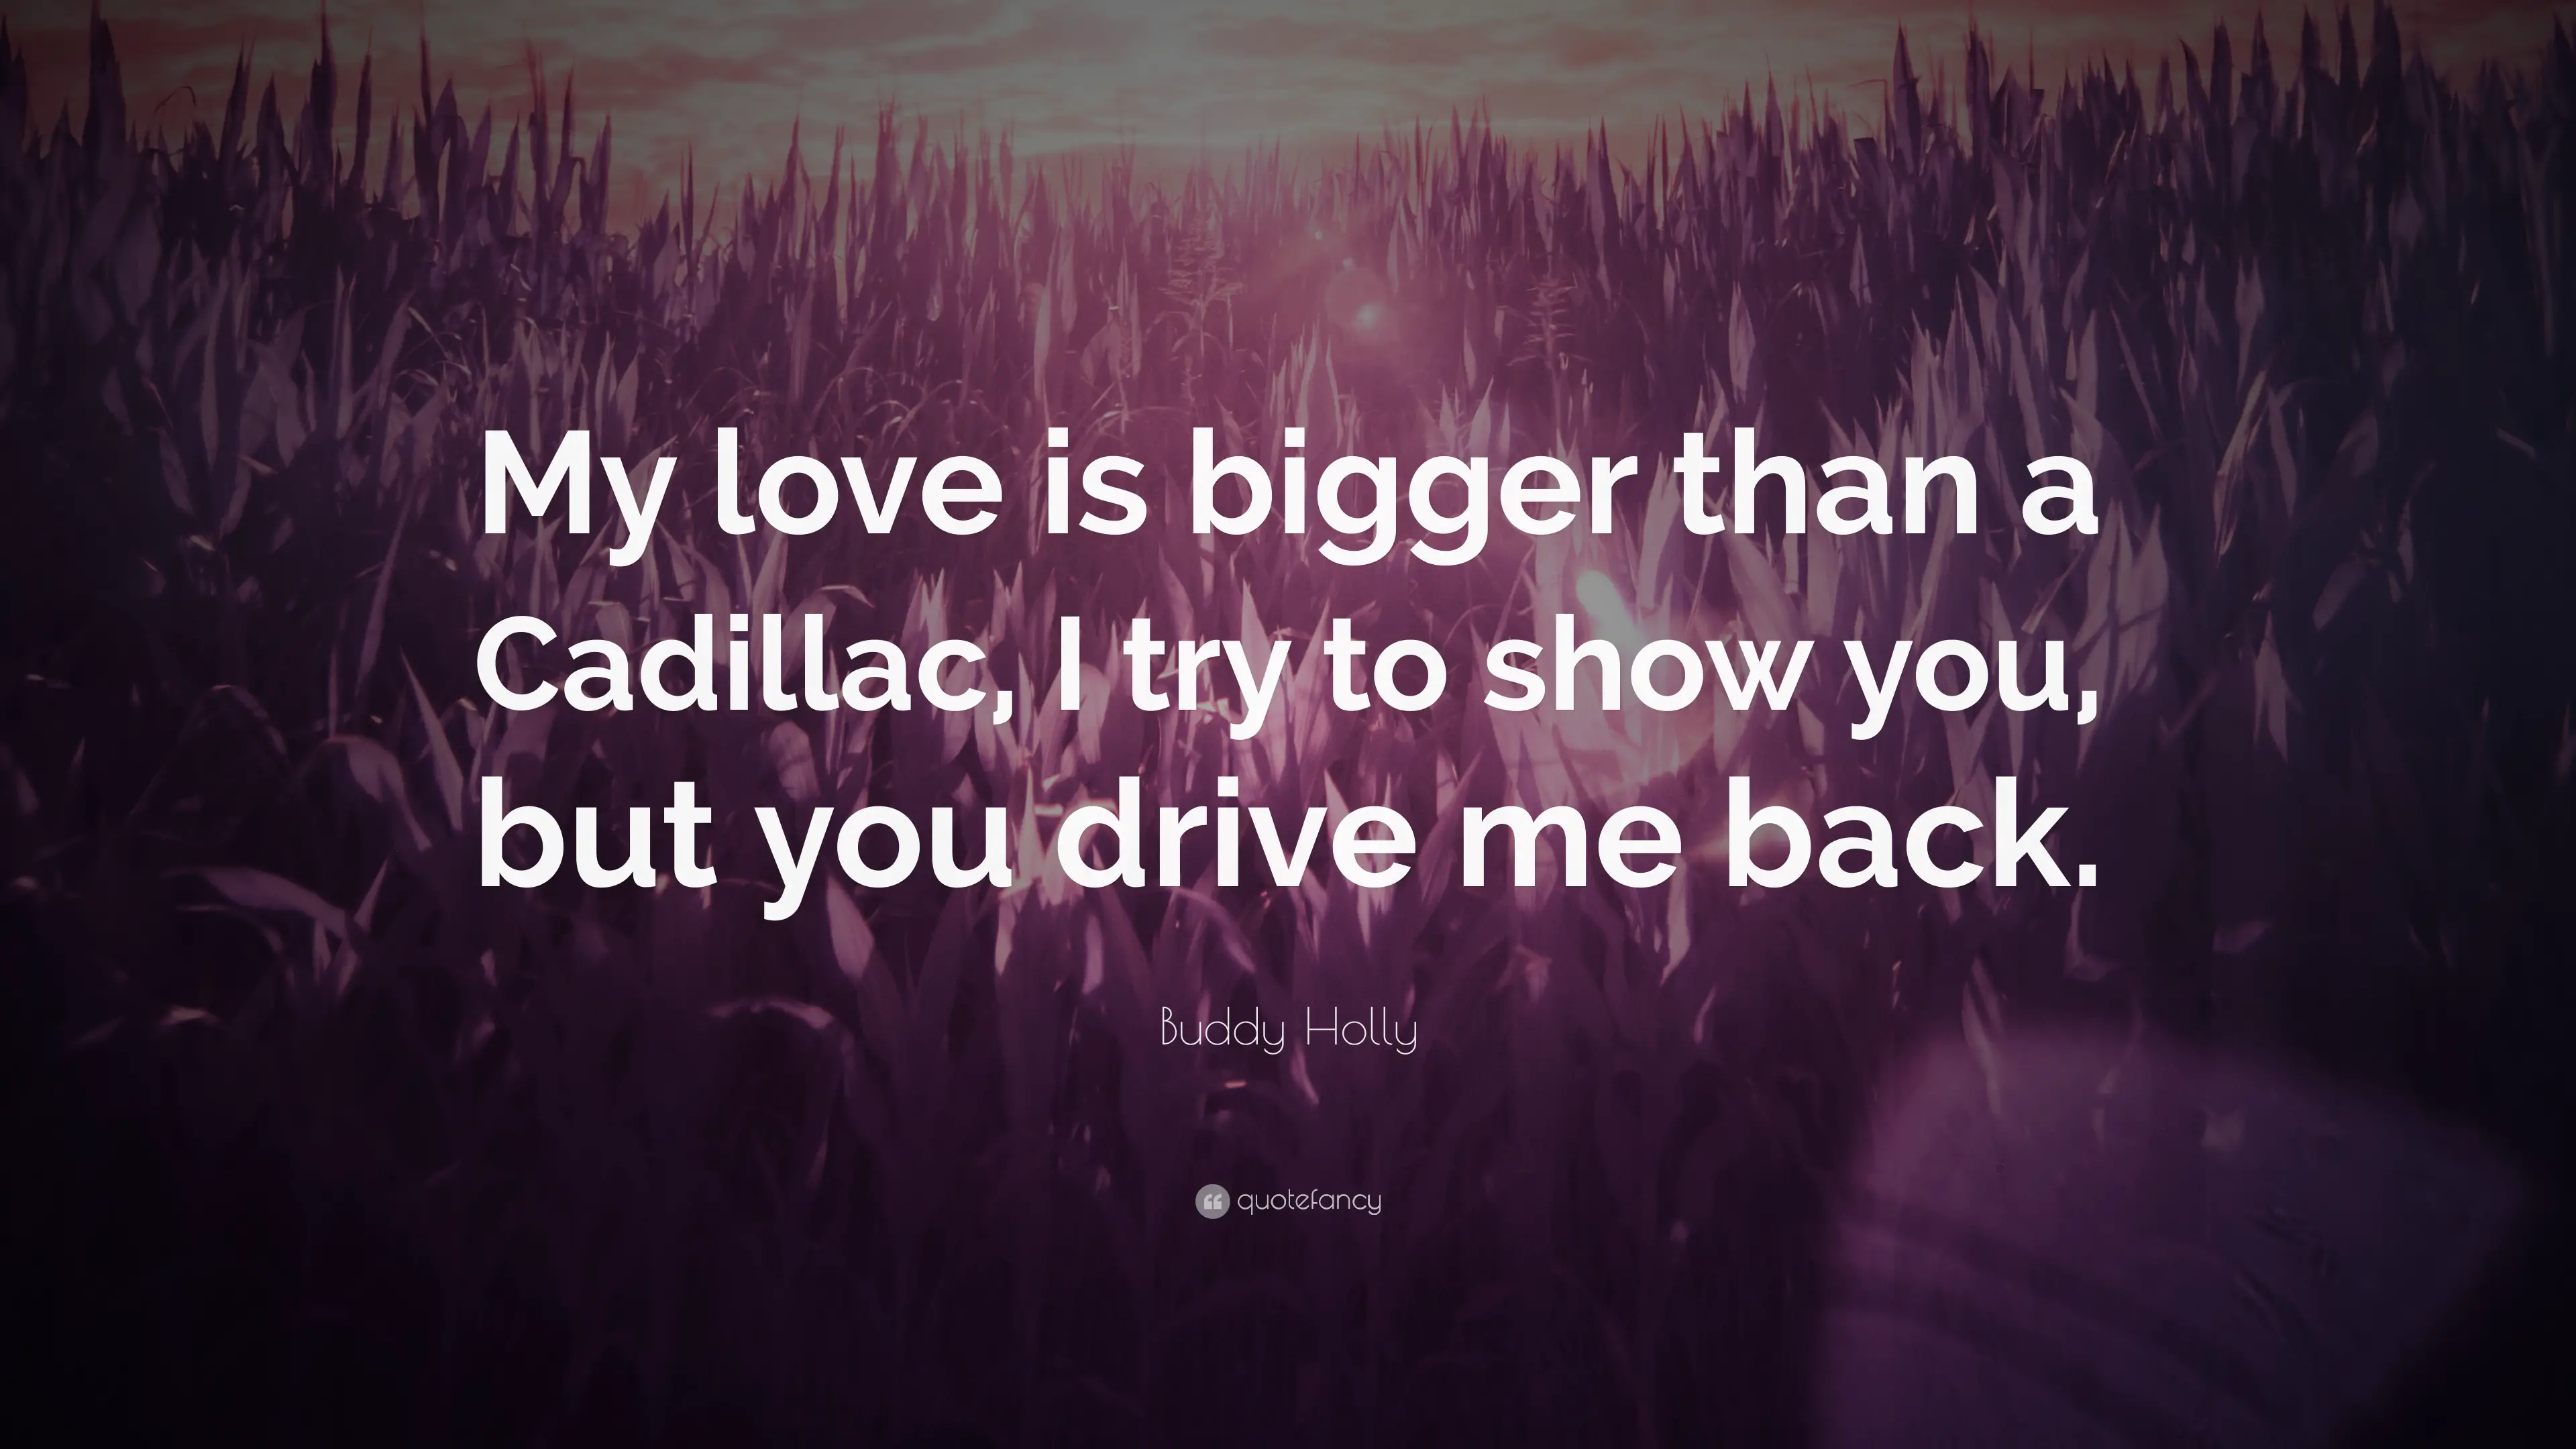 6 Buddy Holly Quotes About Love